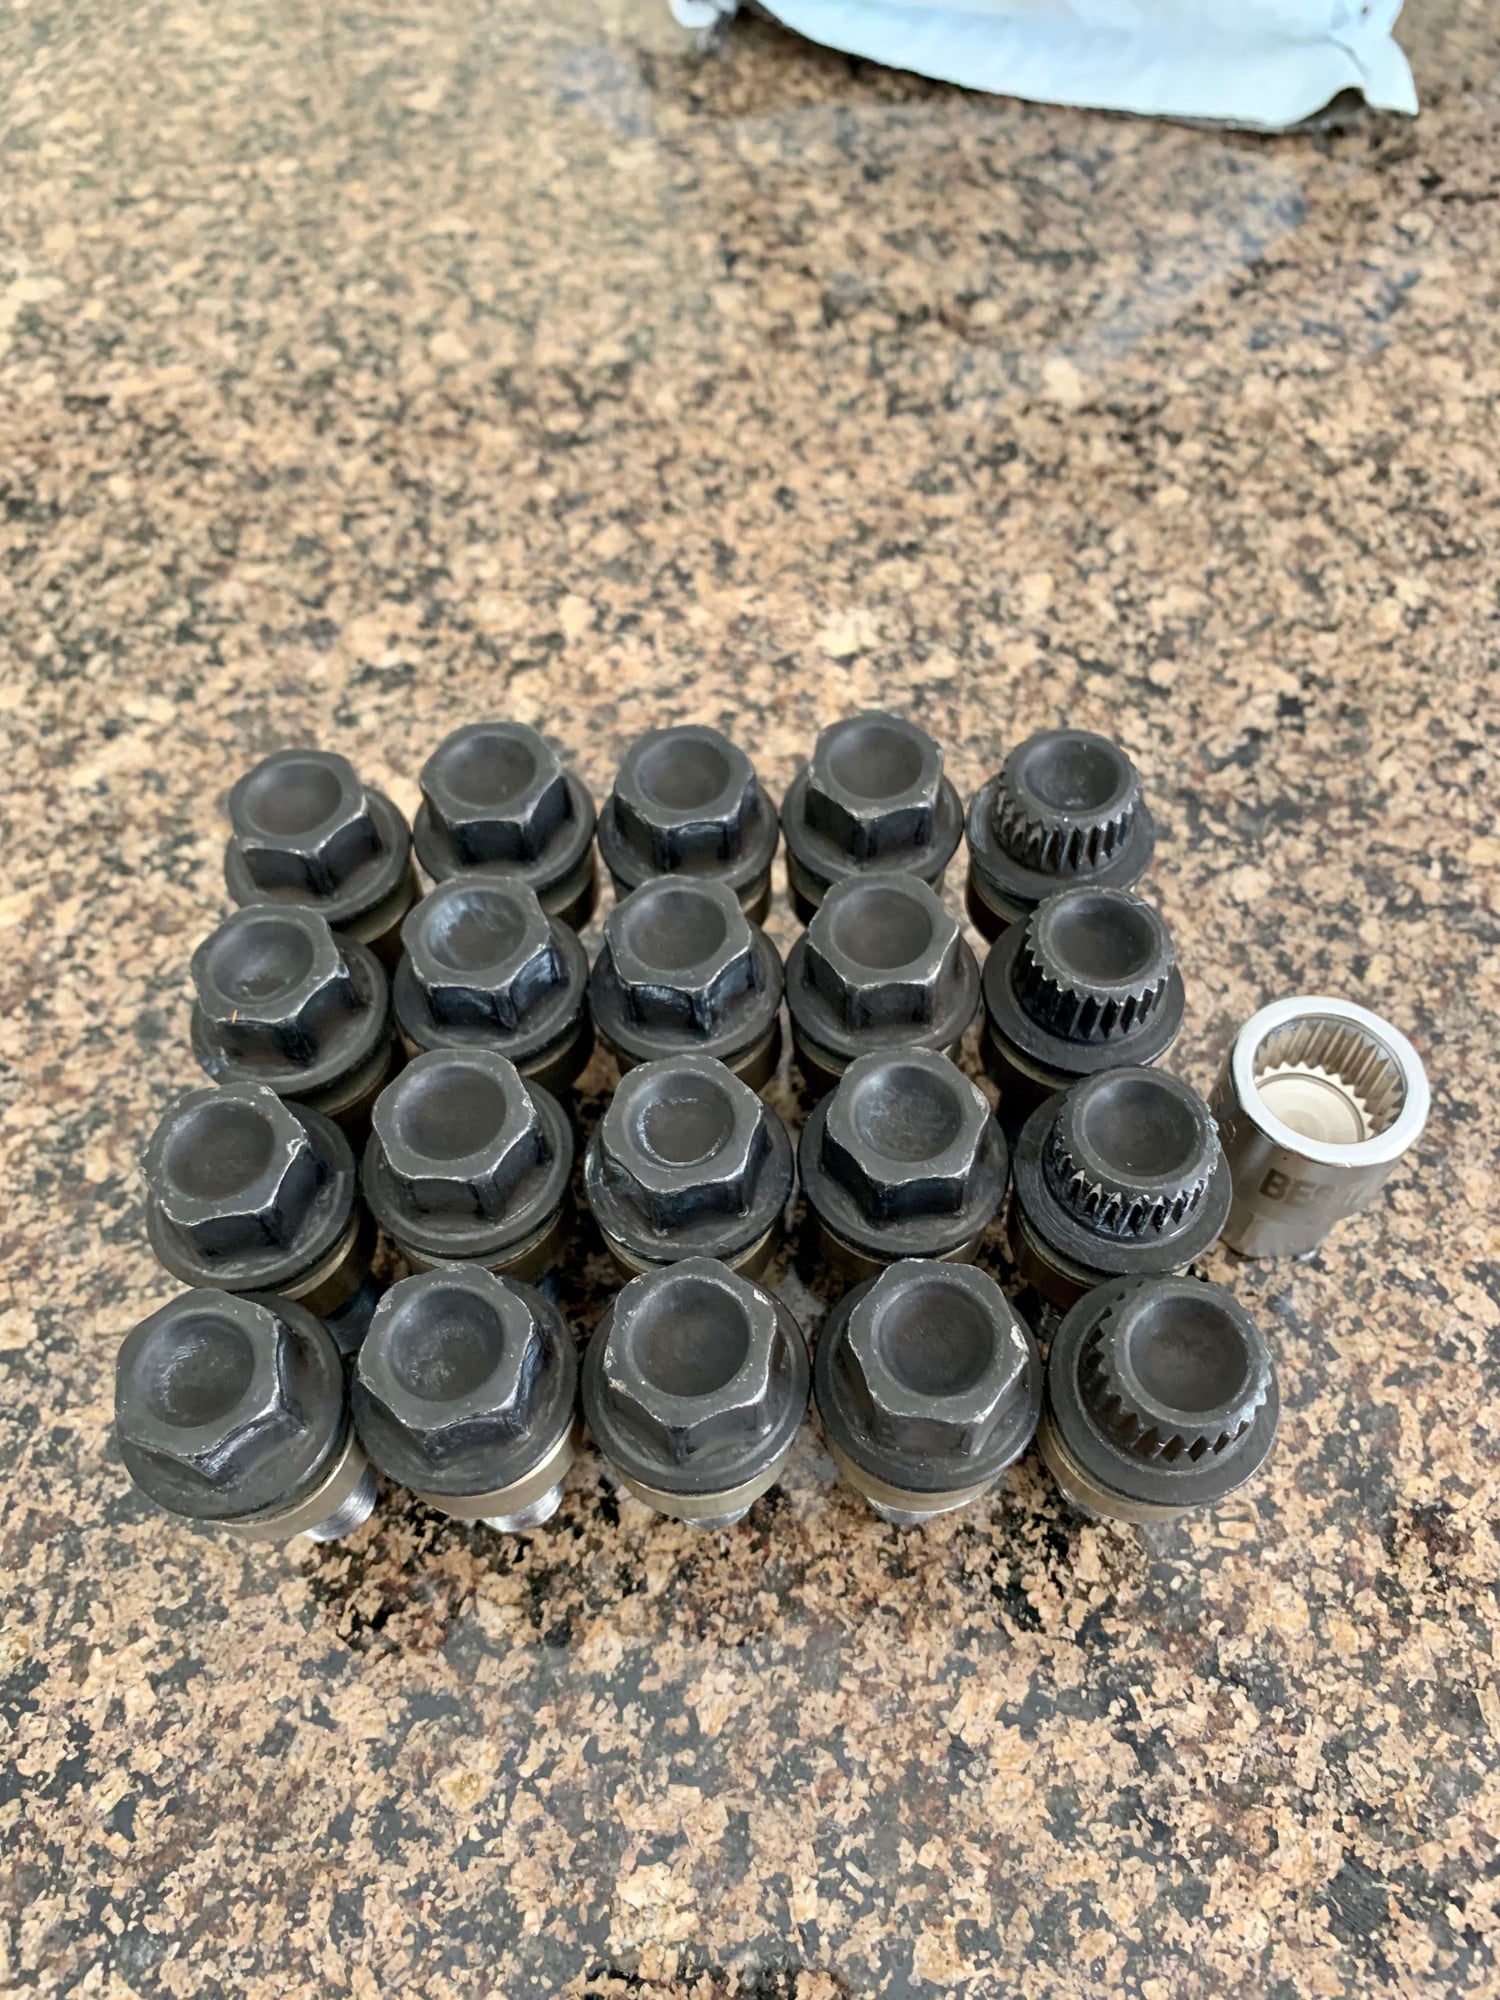 Wheels and Tires/Axles - FS: OEM black lug bolts (20) standard length, full set - Used - 1998 to 2019 Porsche All Models - Lansdale, PA 19446, United States